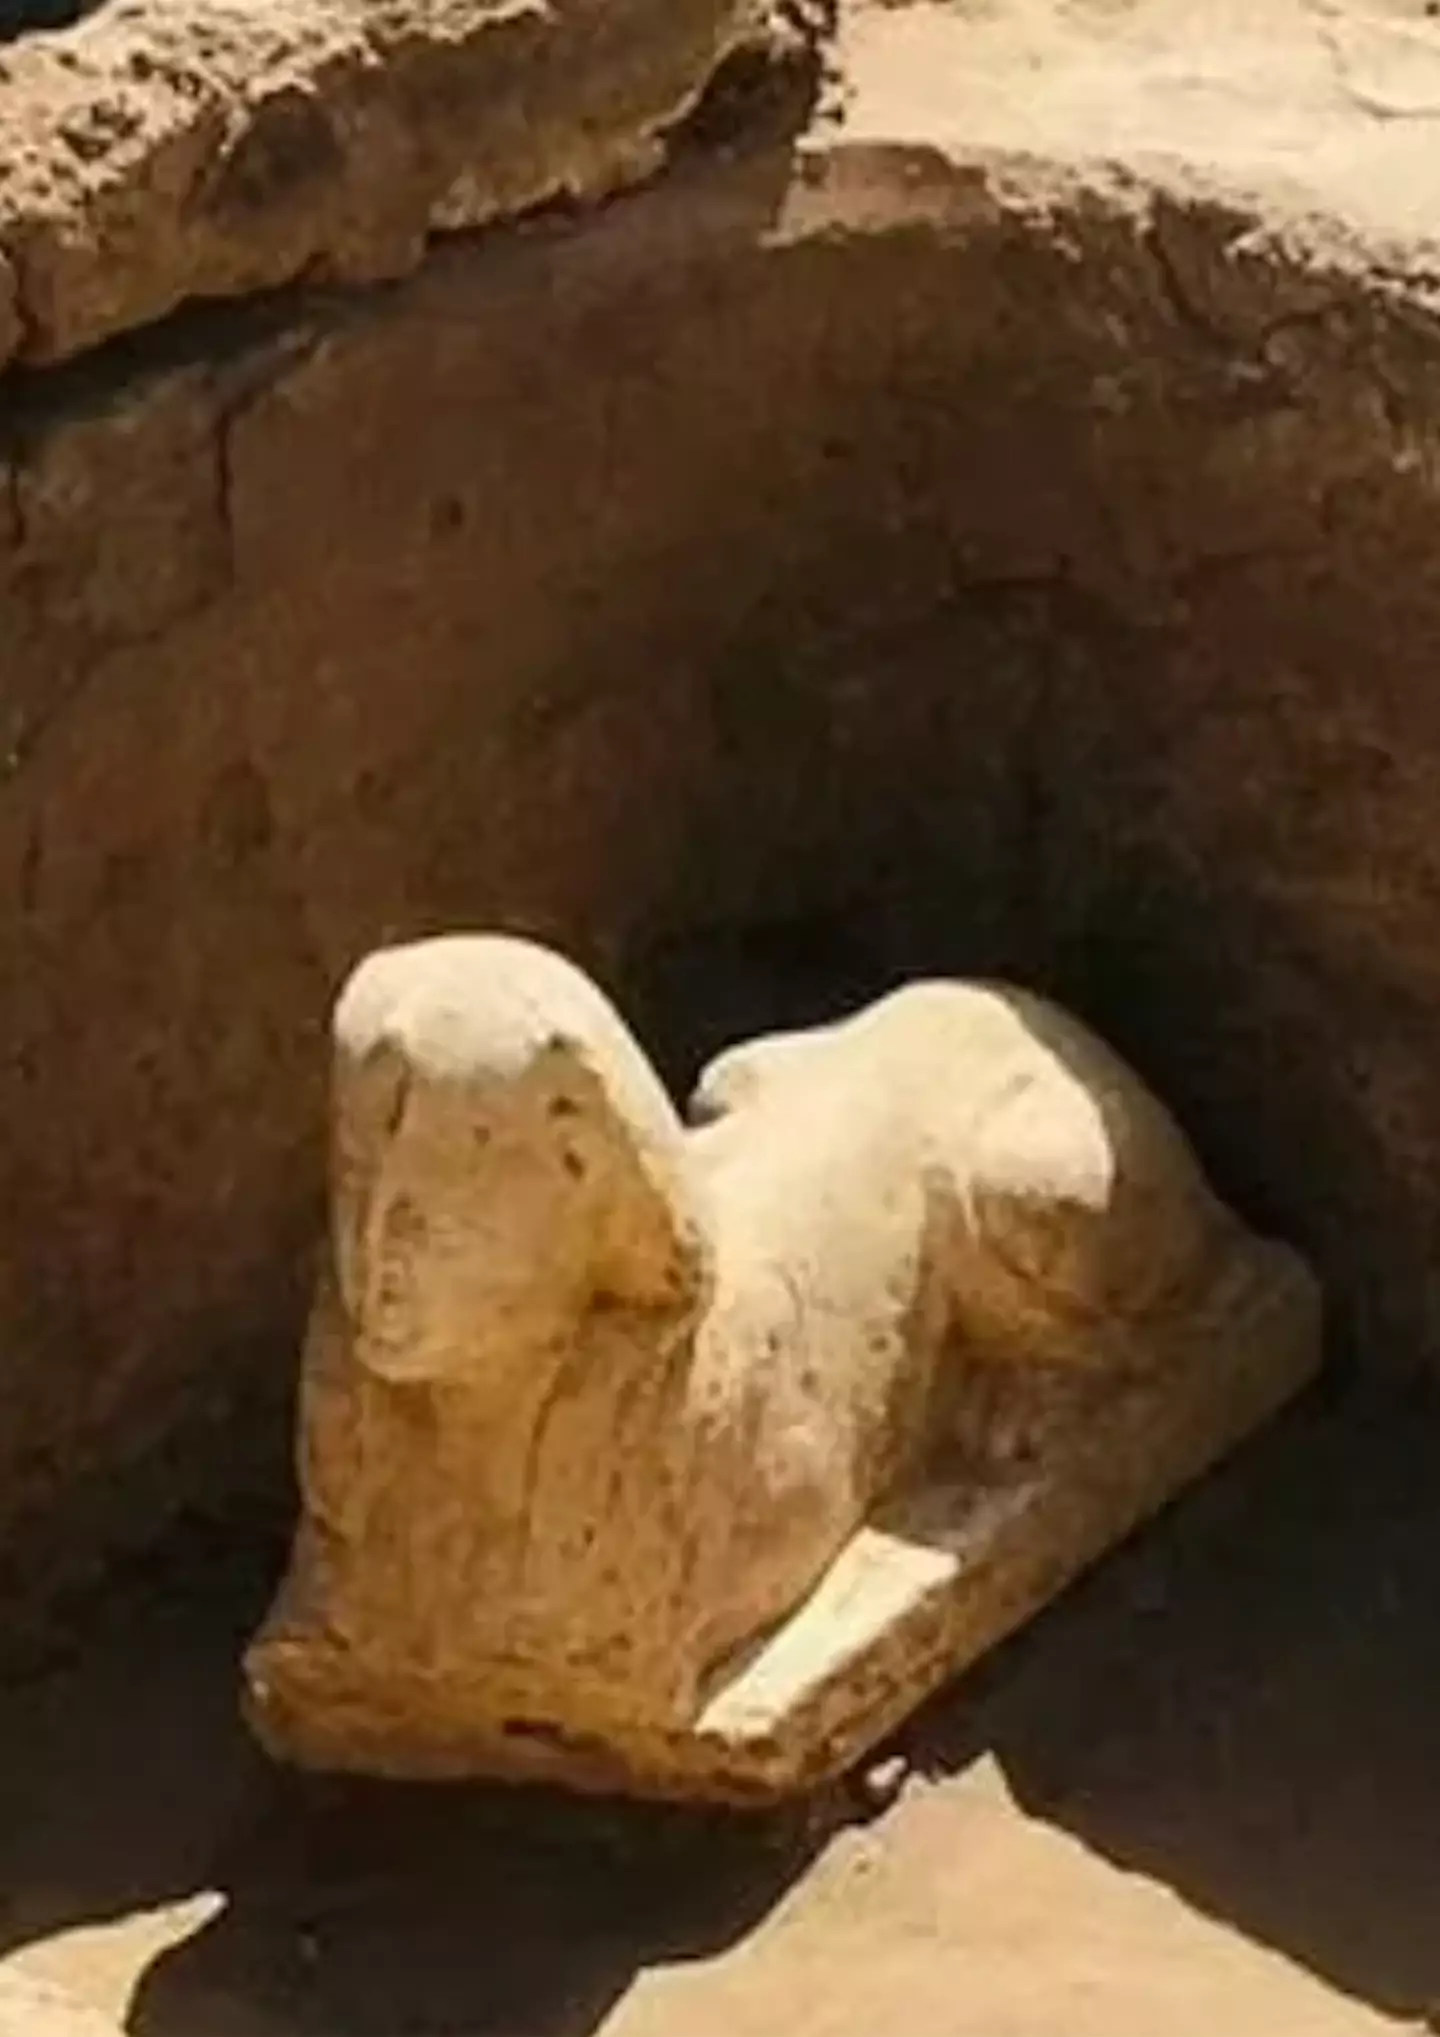 The artefact was discovered in the remains of a shrine in a temple in Qena Province.